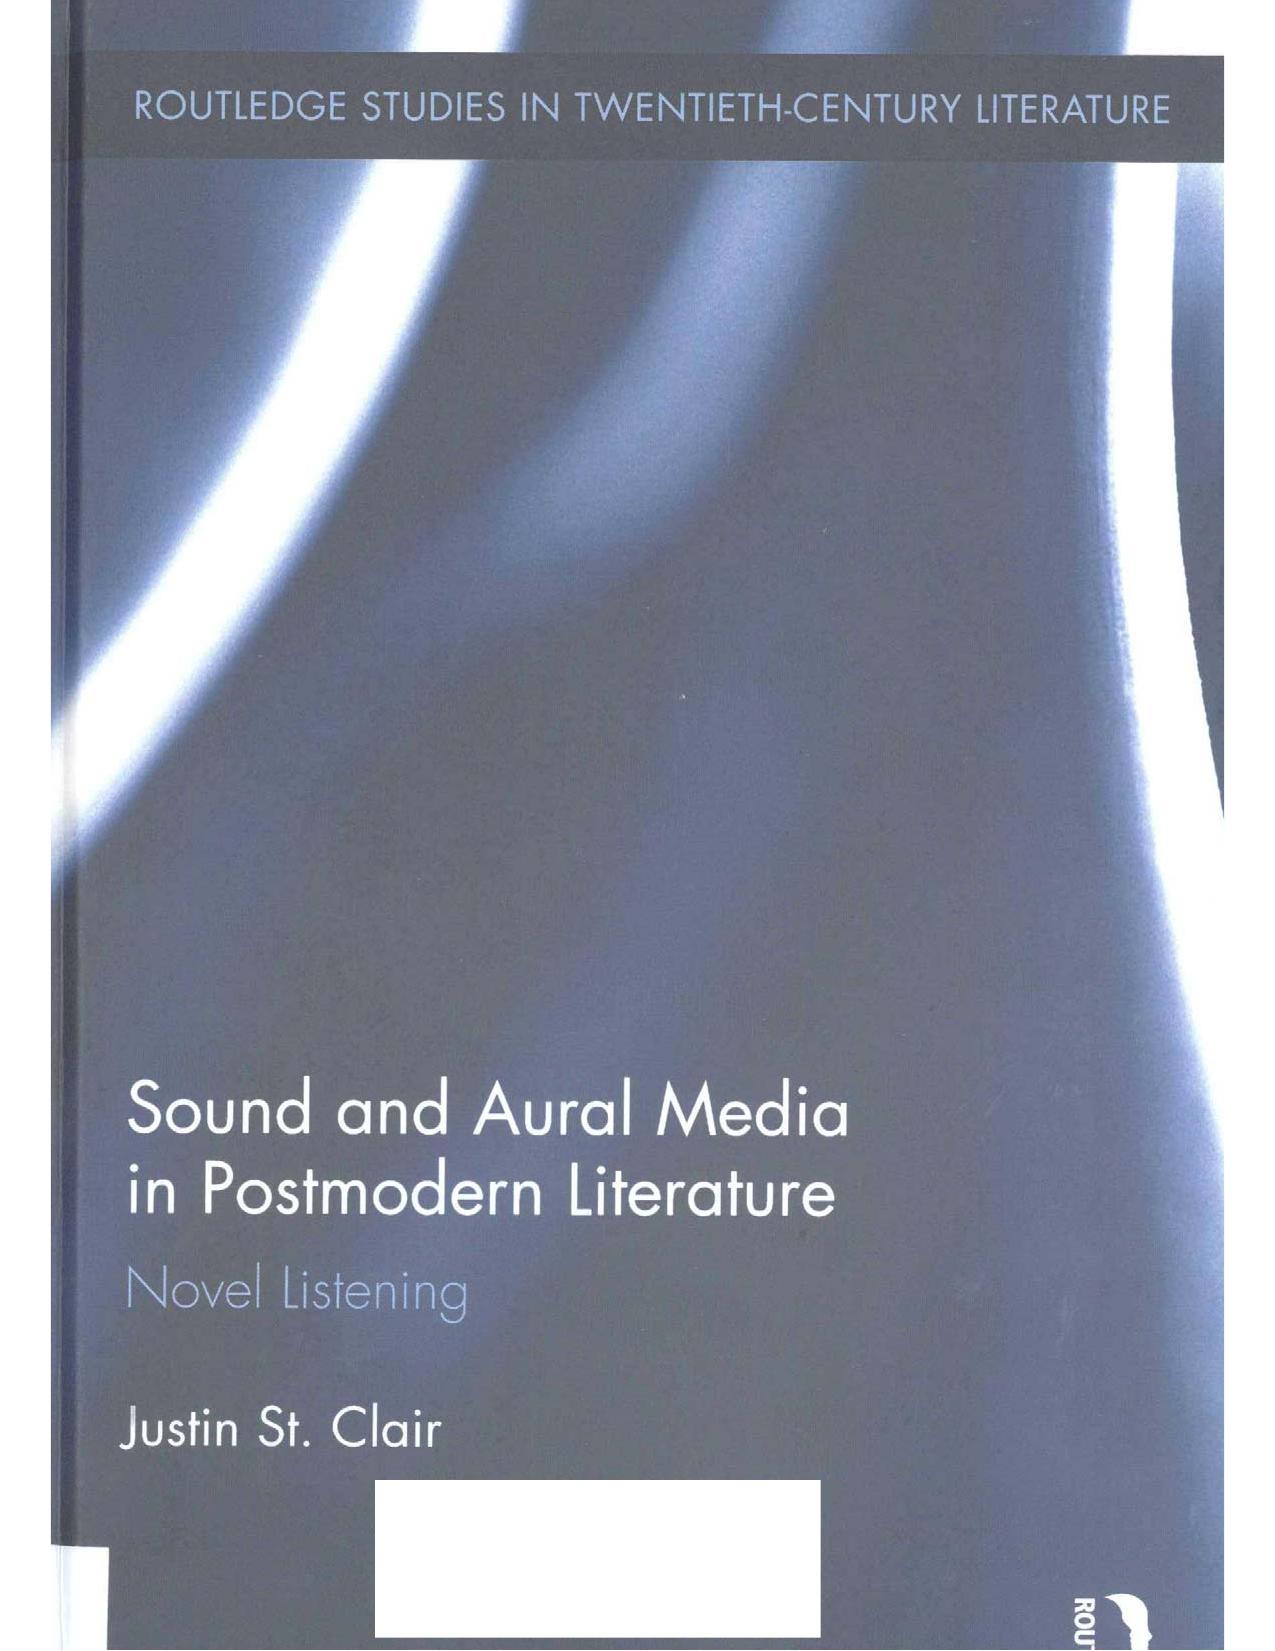 Sound and Aural Media in Postmodern Literature: Novel Listening by Justin St. Clair